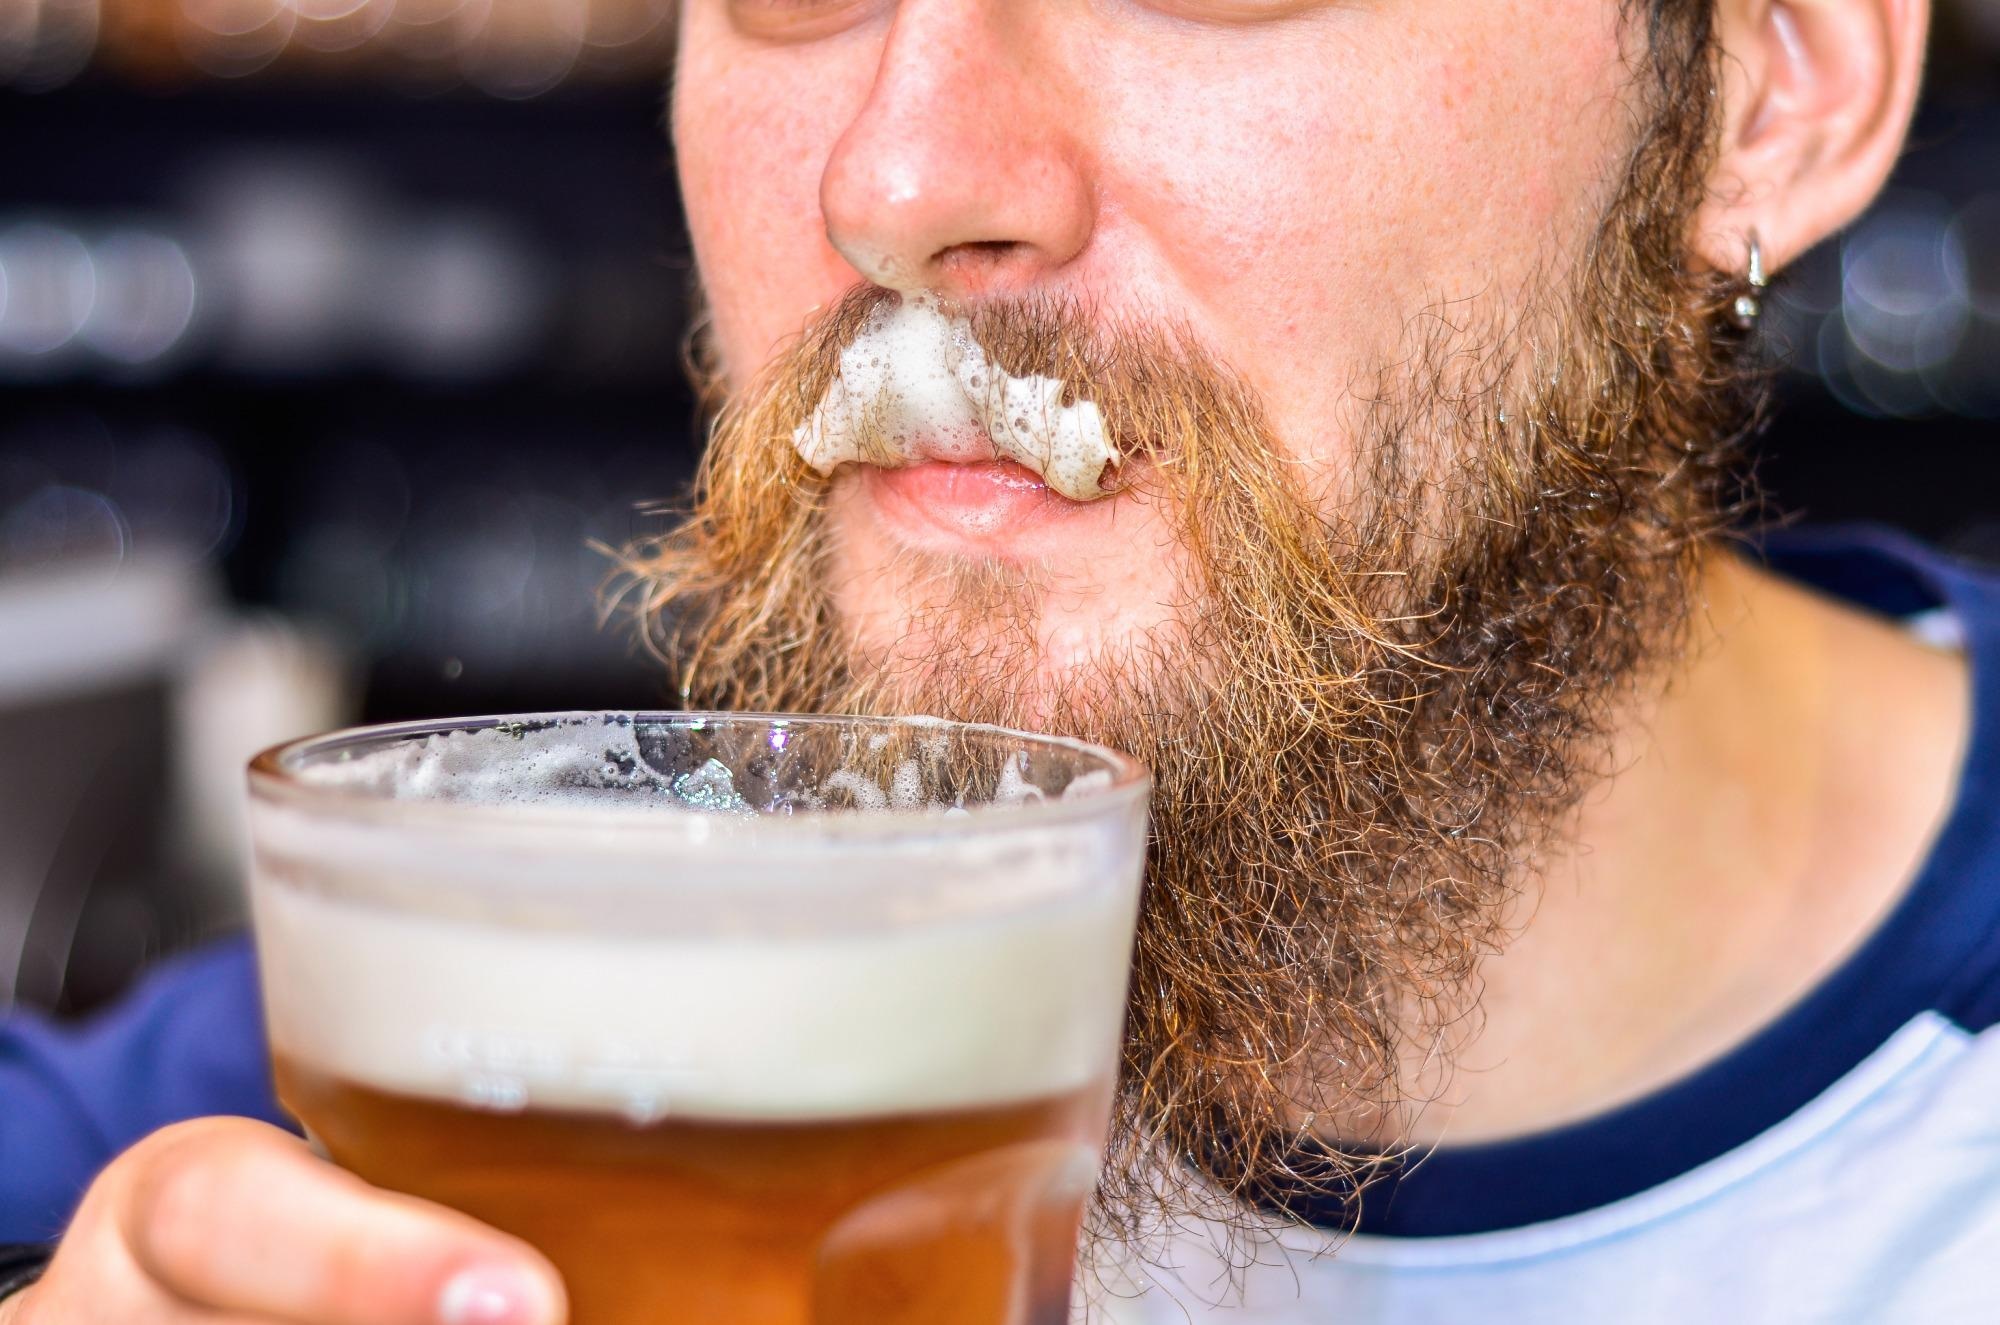 Study: Impact of Beer and Nonalcoholic Beer Consumption on the Gut Microbiota: A Randomized, Double-Blind, Controlled Trial. Image credit: MsMaria / Shutterstock